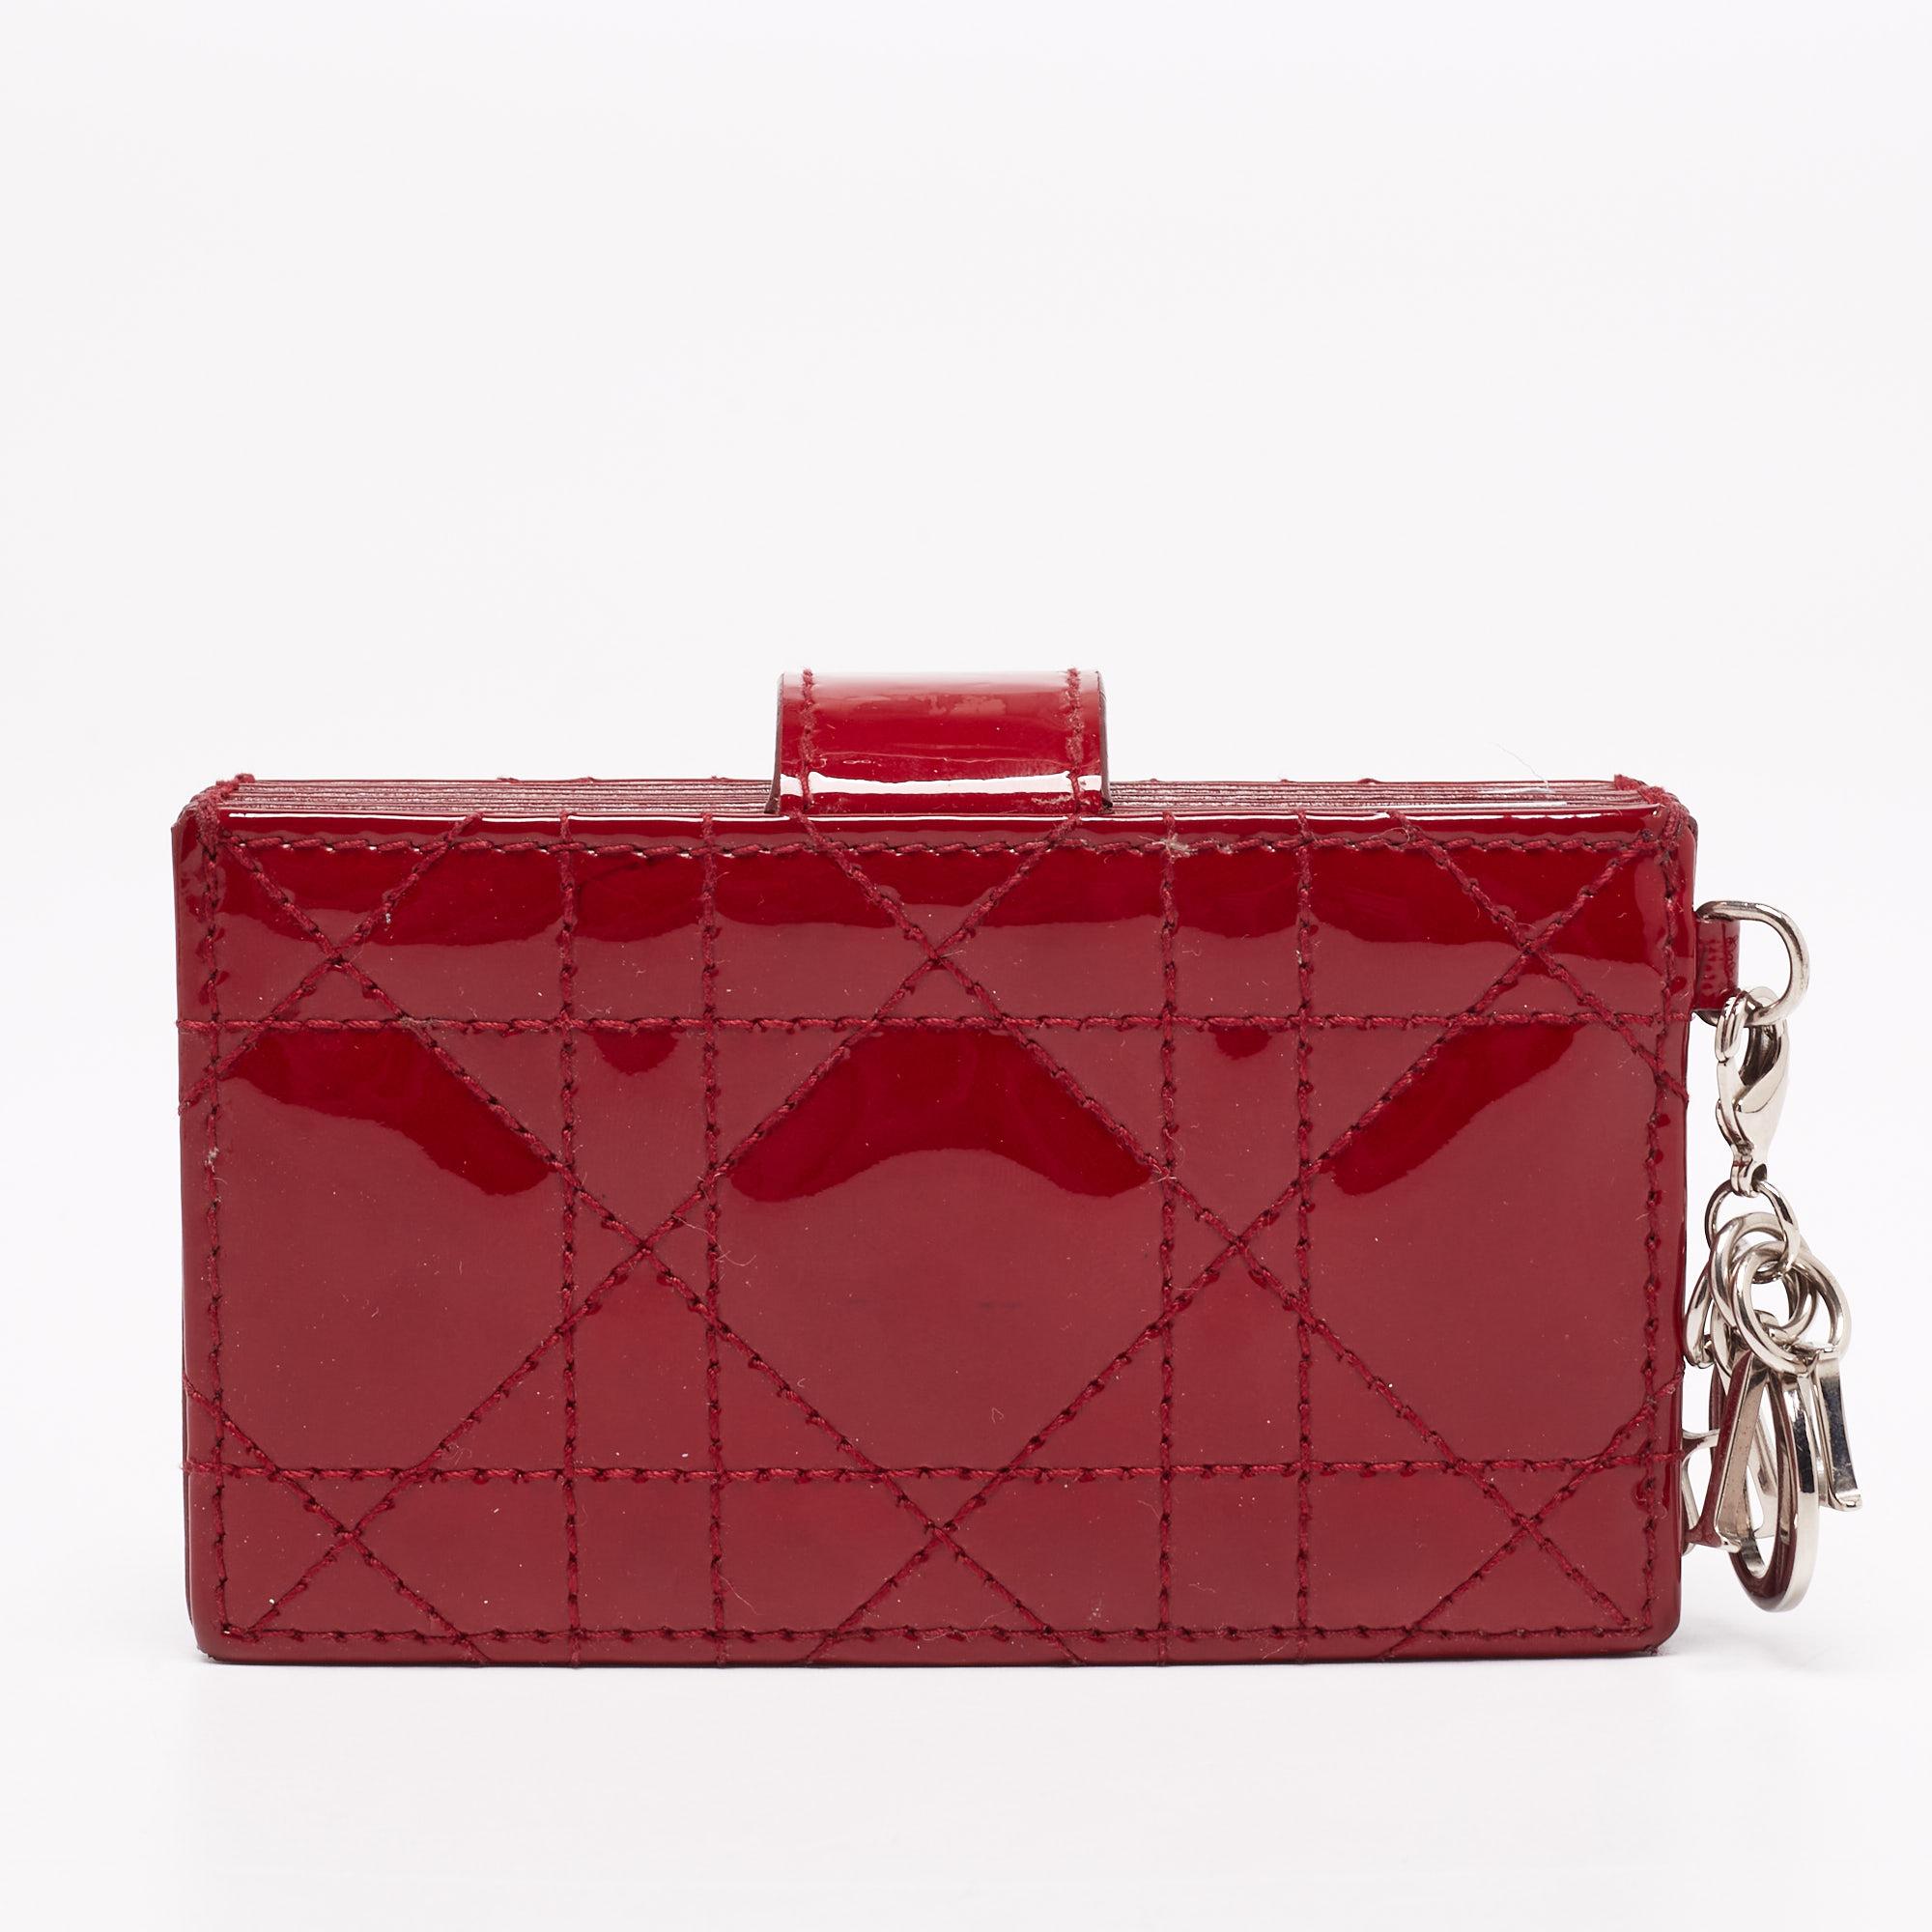 Crafted from patent leather, this Dior gusset cardholder opens to reveal multiple compartments to carry your cards neatly. It also features the brand's iconic Cannage quilt on the exterior. This piece in red is finished with silver-tone hardware and